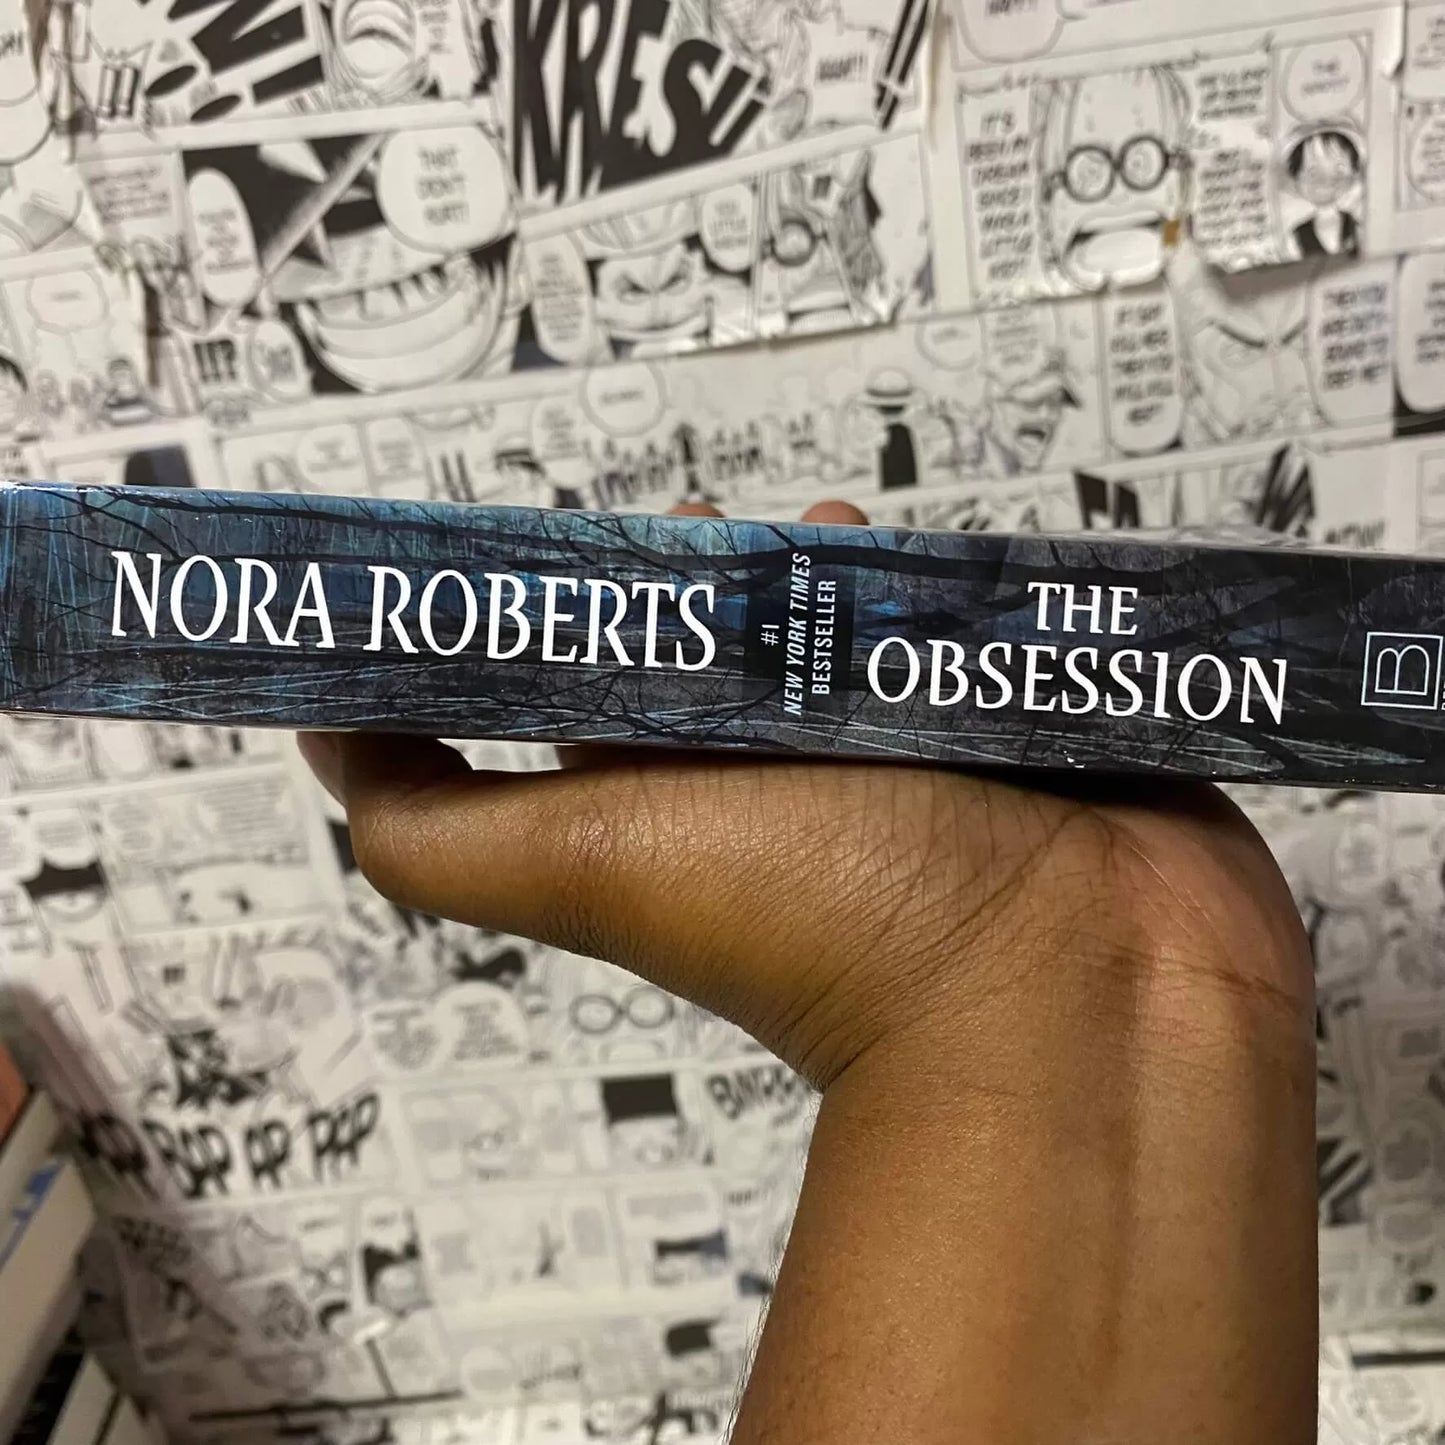 The Obsession Paperback novel by Nora Roberts